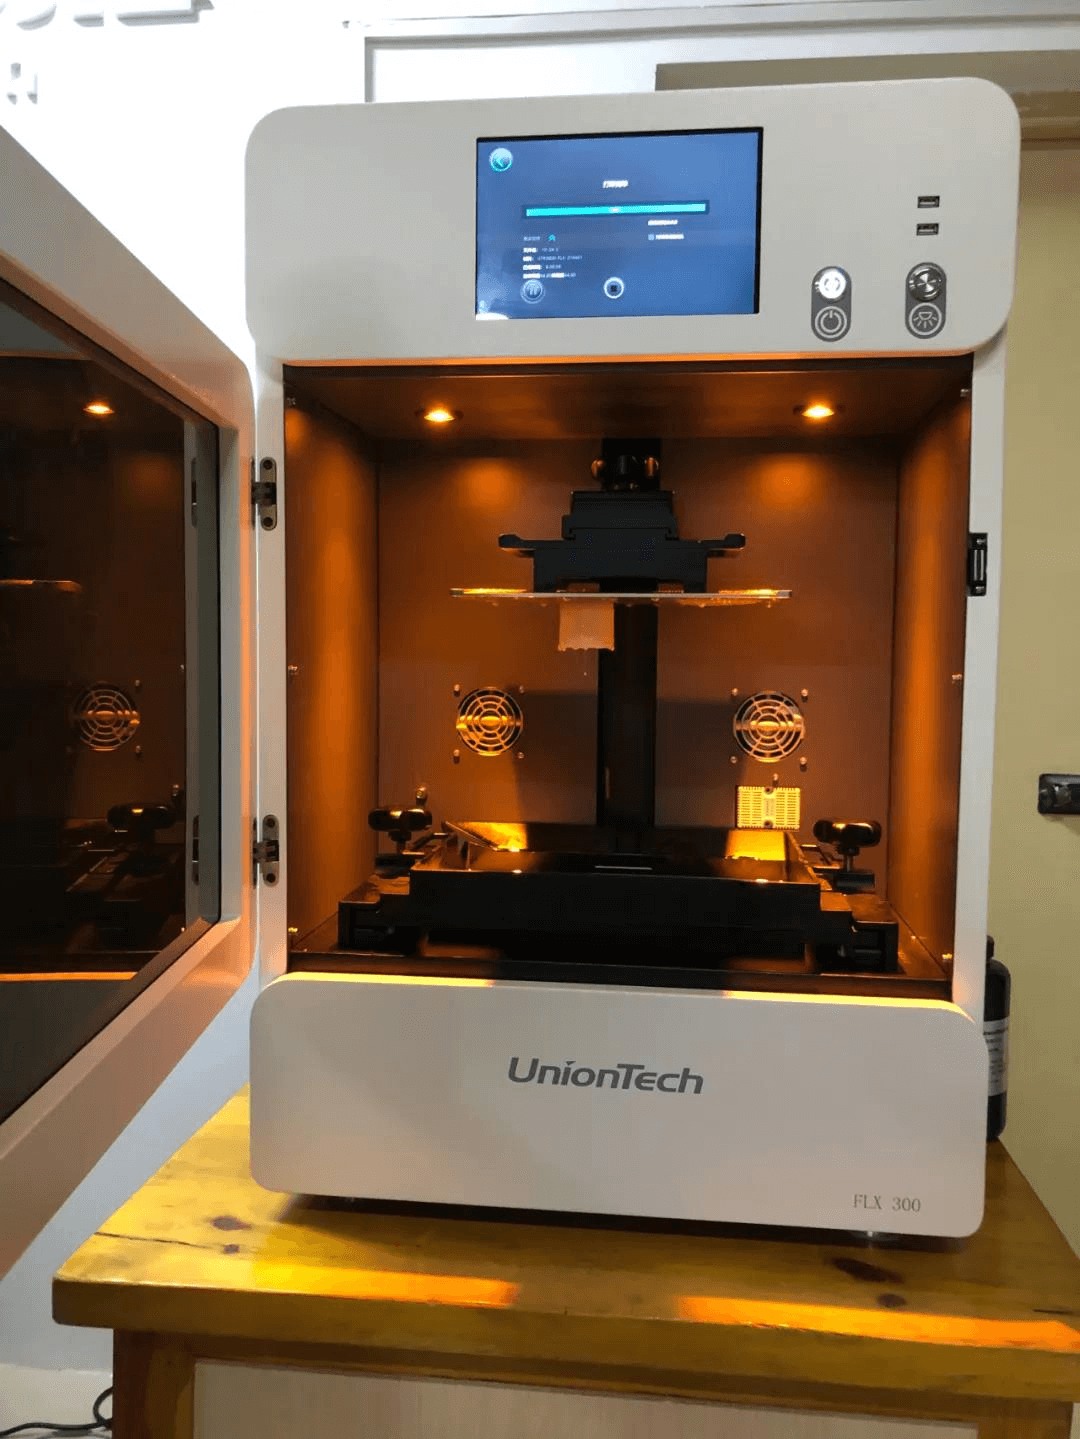 Uniontech Provided 3D Printers and Technical Support for the World Ceramics